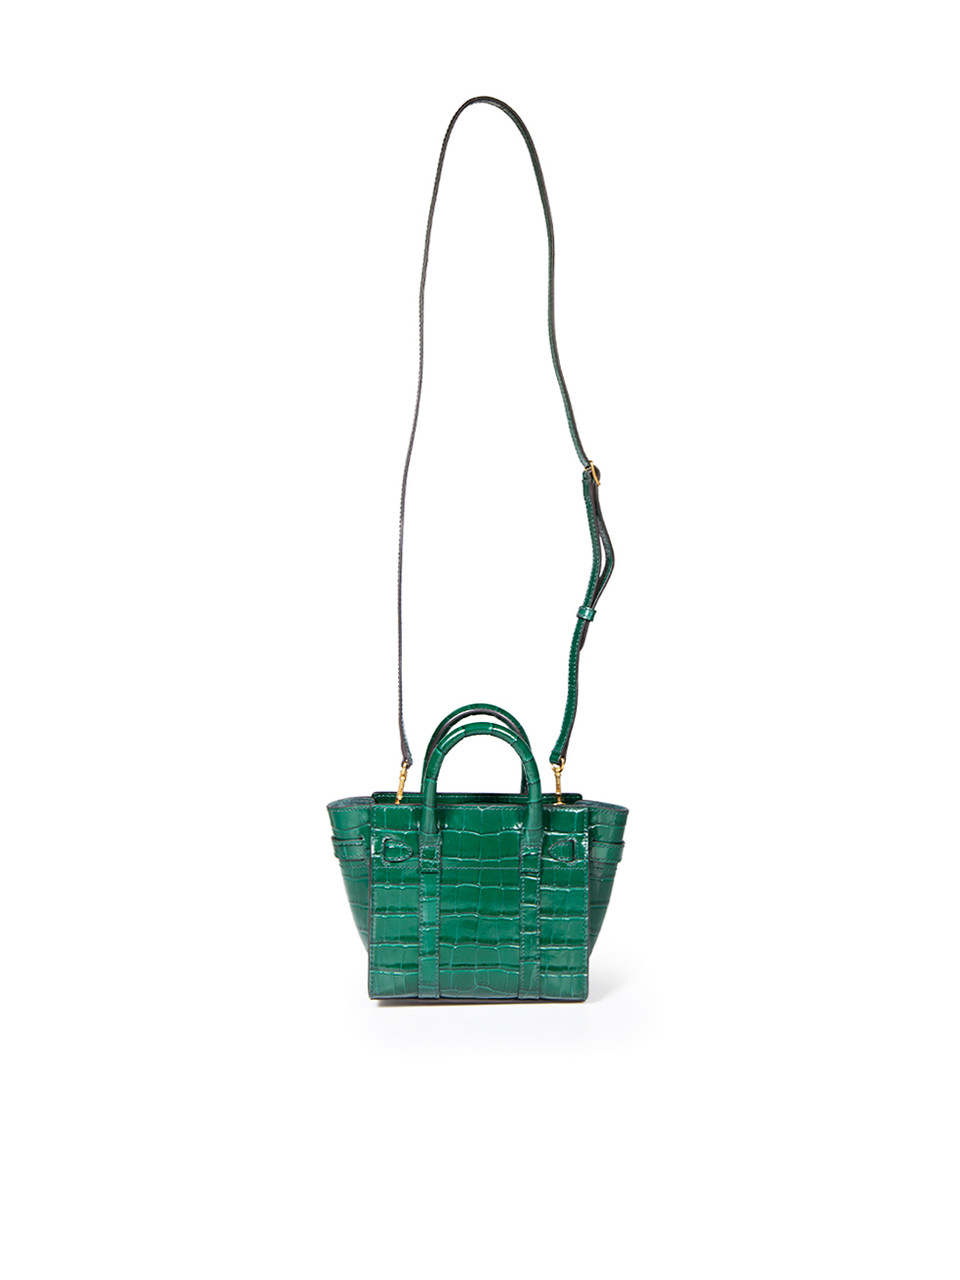 Mulberry Green Croc Embossed Micro Zipped Bayswater Bag